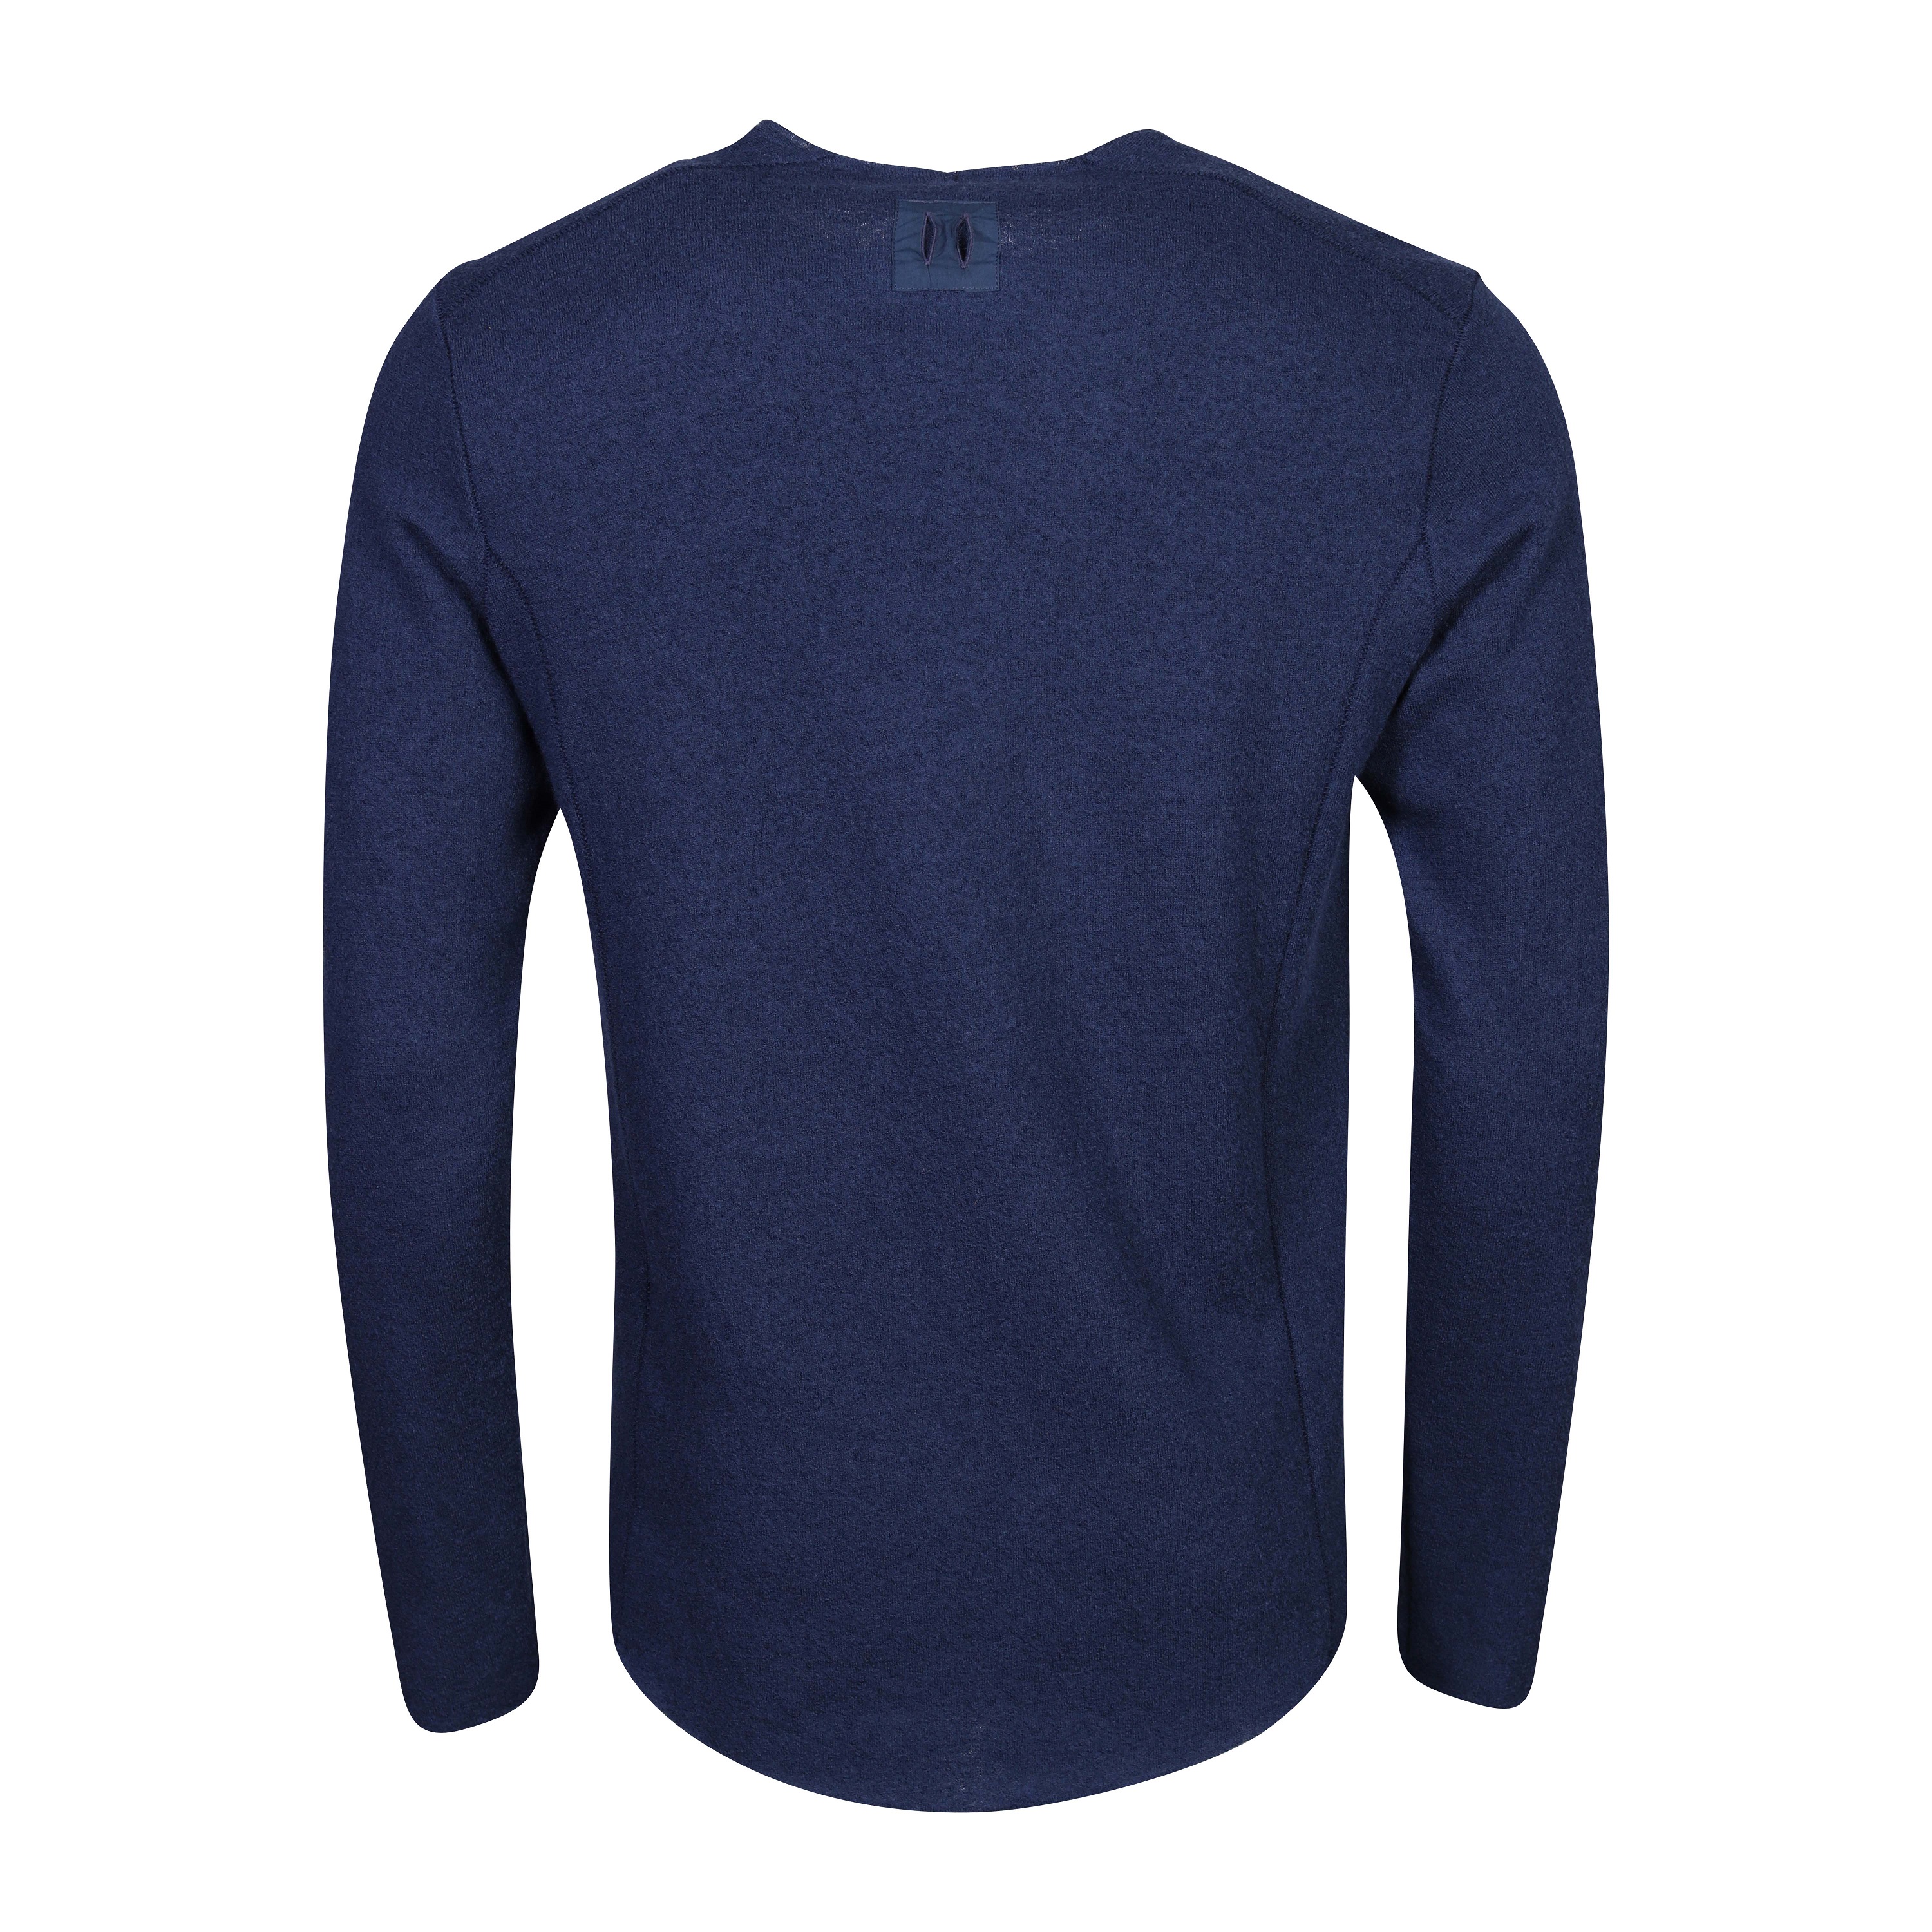 Hannes Roether Knit Pullover in Uniform